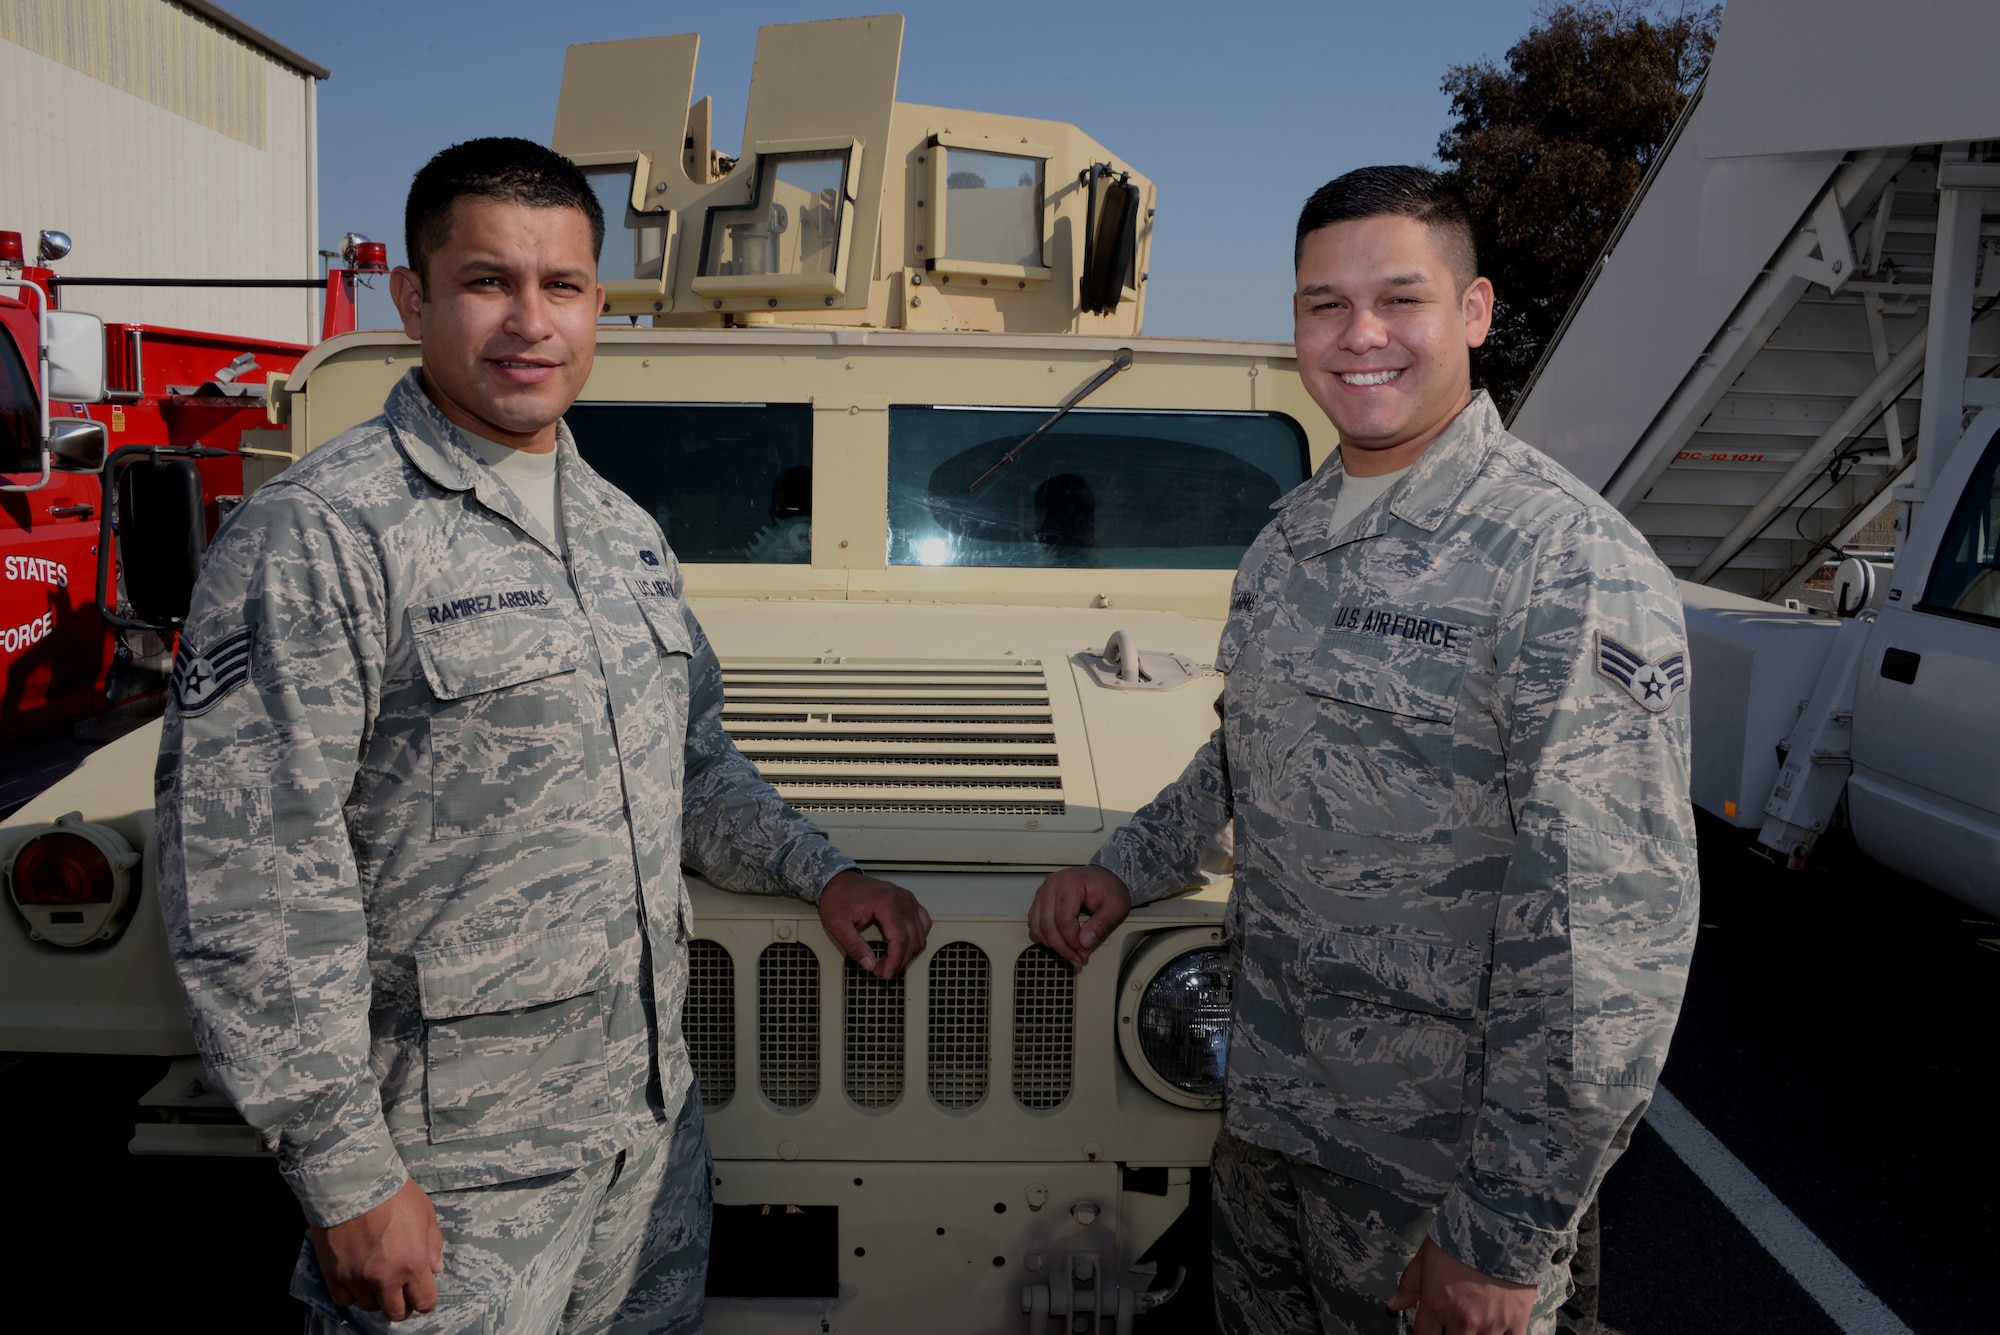 Staff Sgt. Angel Ramirez Arenas (Left), 60th Logistical Readiness Squadron NCO in charge of fleet management, poses for a photo with his brother, Senior Airman Ramon Ramirez Arenas (Right), 60th Surgical Operations Squadron surgical technician, at Travis Air Force Base, Calif., Sept. 7, 2016. The brothers from Compton, Calif., have been assigned to TAFB for almost two years and have nearly a decade of military service between them. (U.S. Air Force photo by Tech. Sgt. James Hodgman)